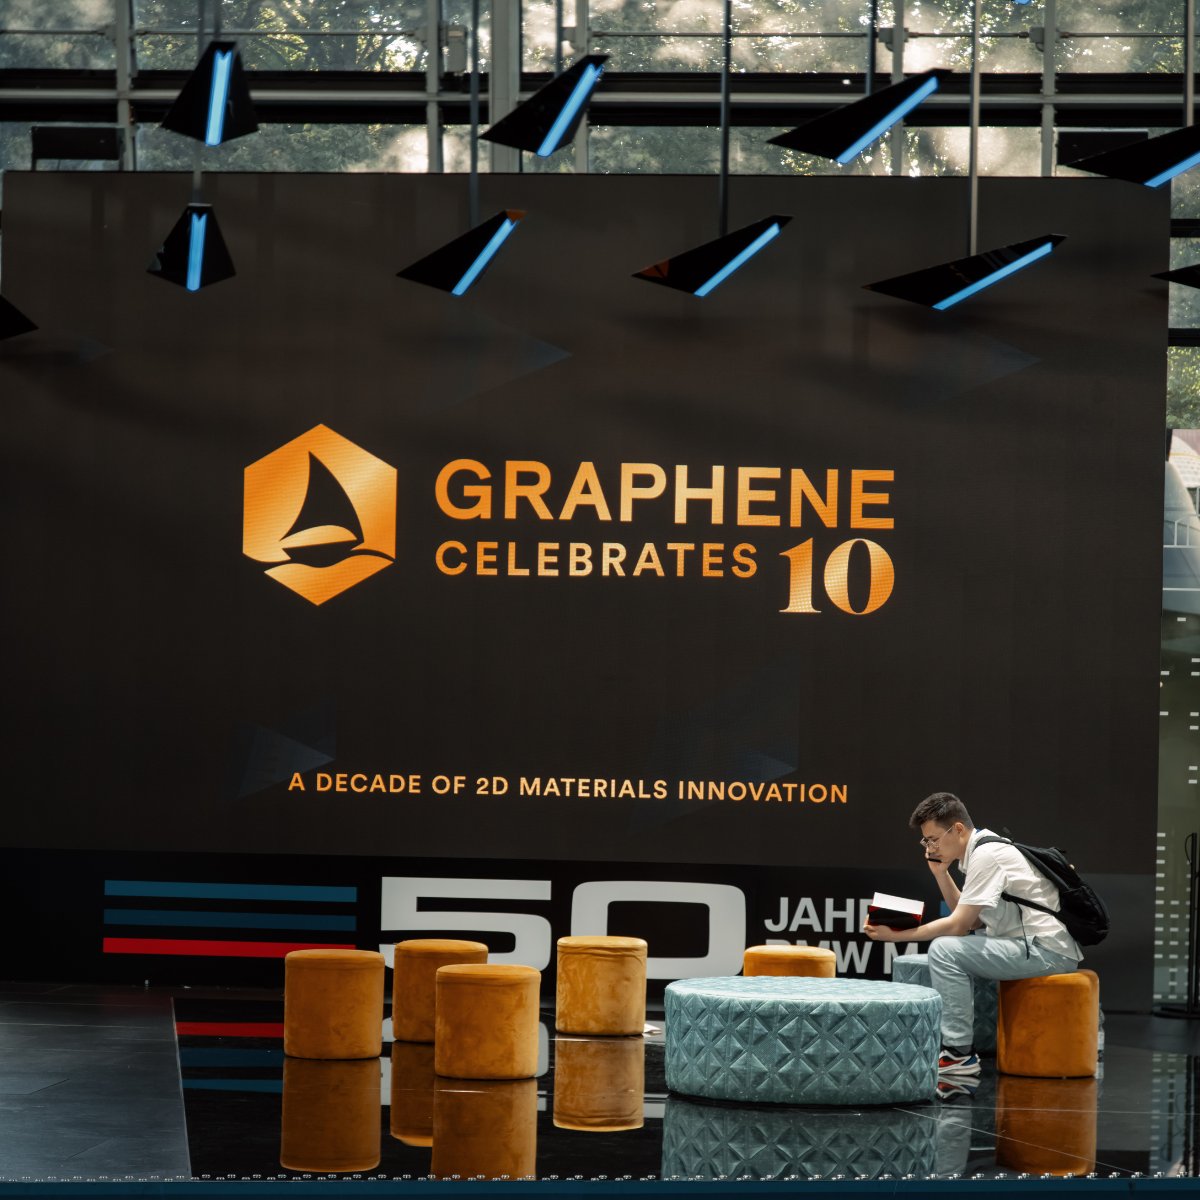 2023 marks The Graphene Flagship's 10th anniversary, and we have plenty of exciting events and initiatives we’re passionate about in the works! Take a look at some of our upcoming activities you can participate in and milestones we're celebrating! ✨ https://t.co/Y6QzXnxX7B https://t.co/Bs7rUqxs55